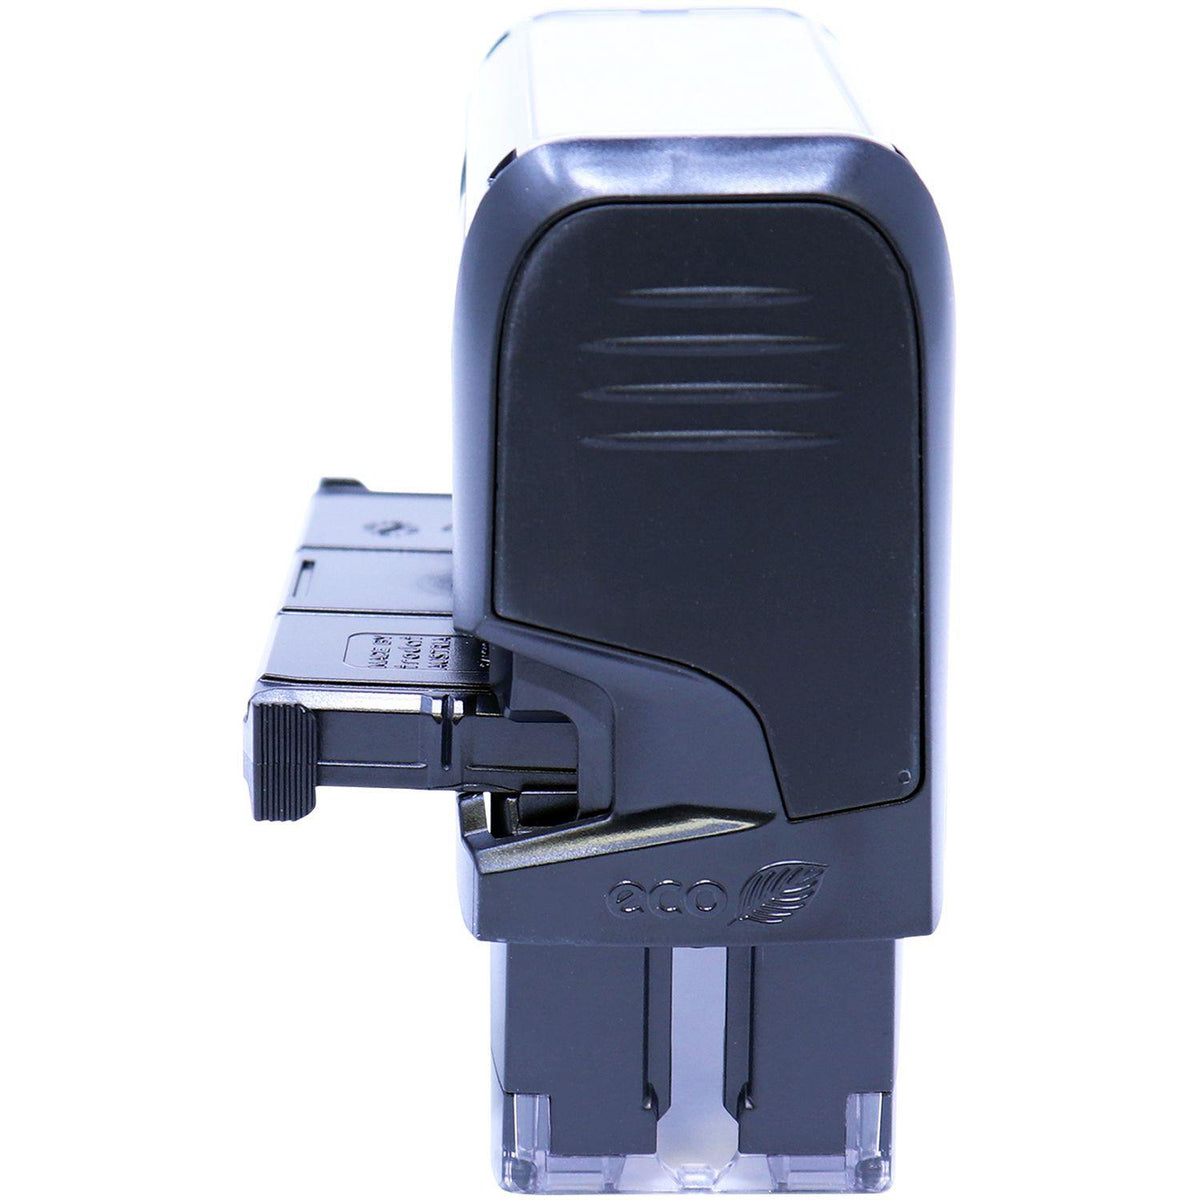 Self-Inking Fax Memo Stamp - Engineer Seal Stamps - Brand_Trodat, Impression Size_Small, Stamp Type_Self-Inking Stamp, Type of Use_Business, Type of Use_Office, Type of Use_Professional